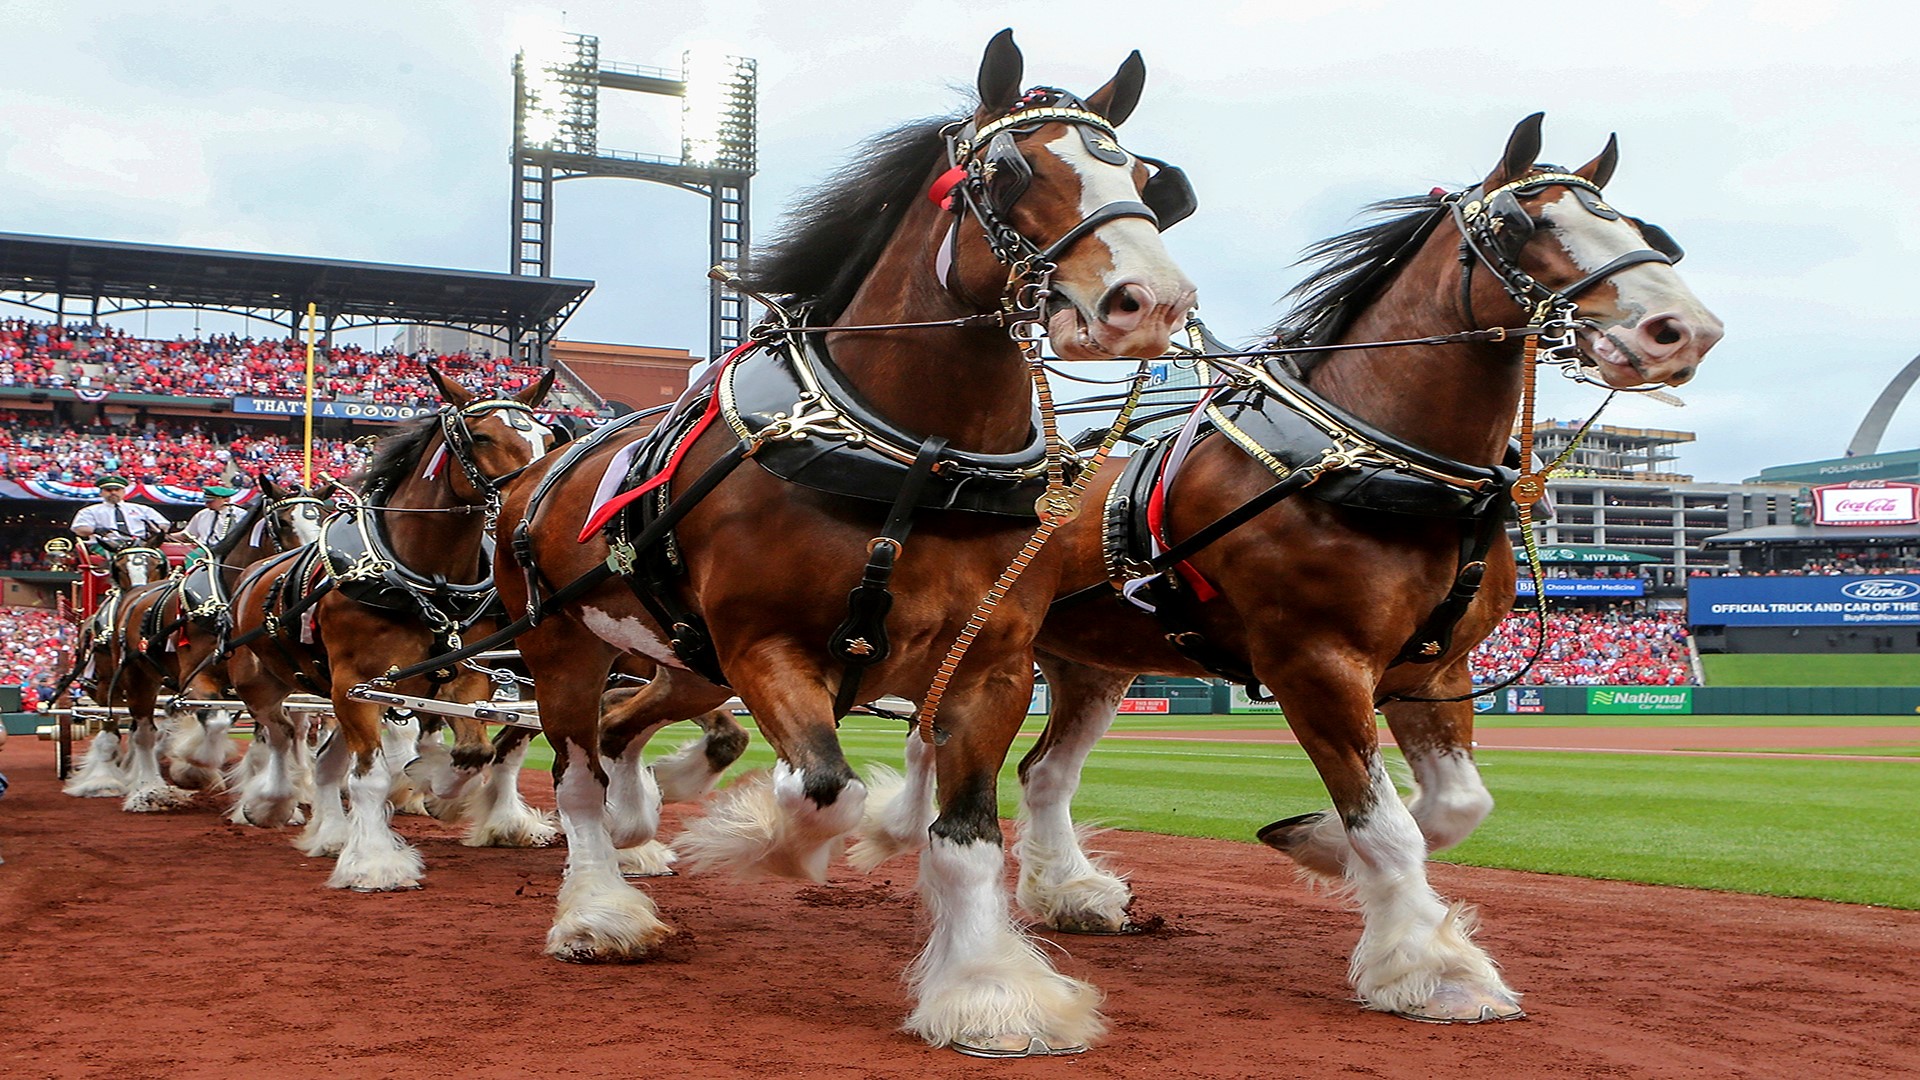 Budweiser Clydesdales to visit Bardstown for Kentucky Bourbon Festival | whas11.com